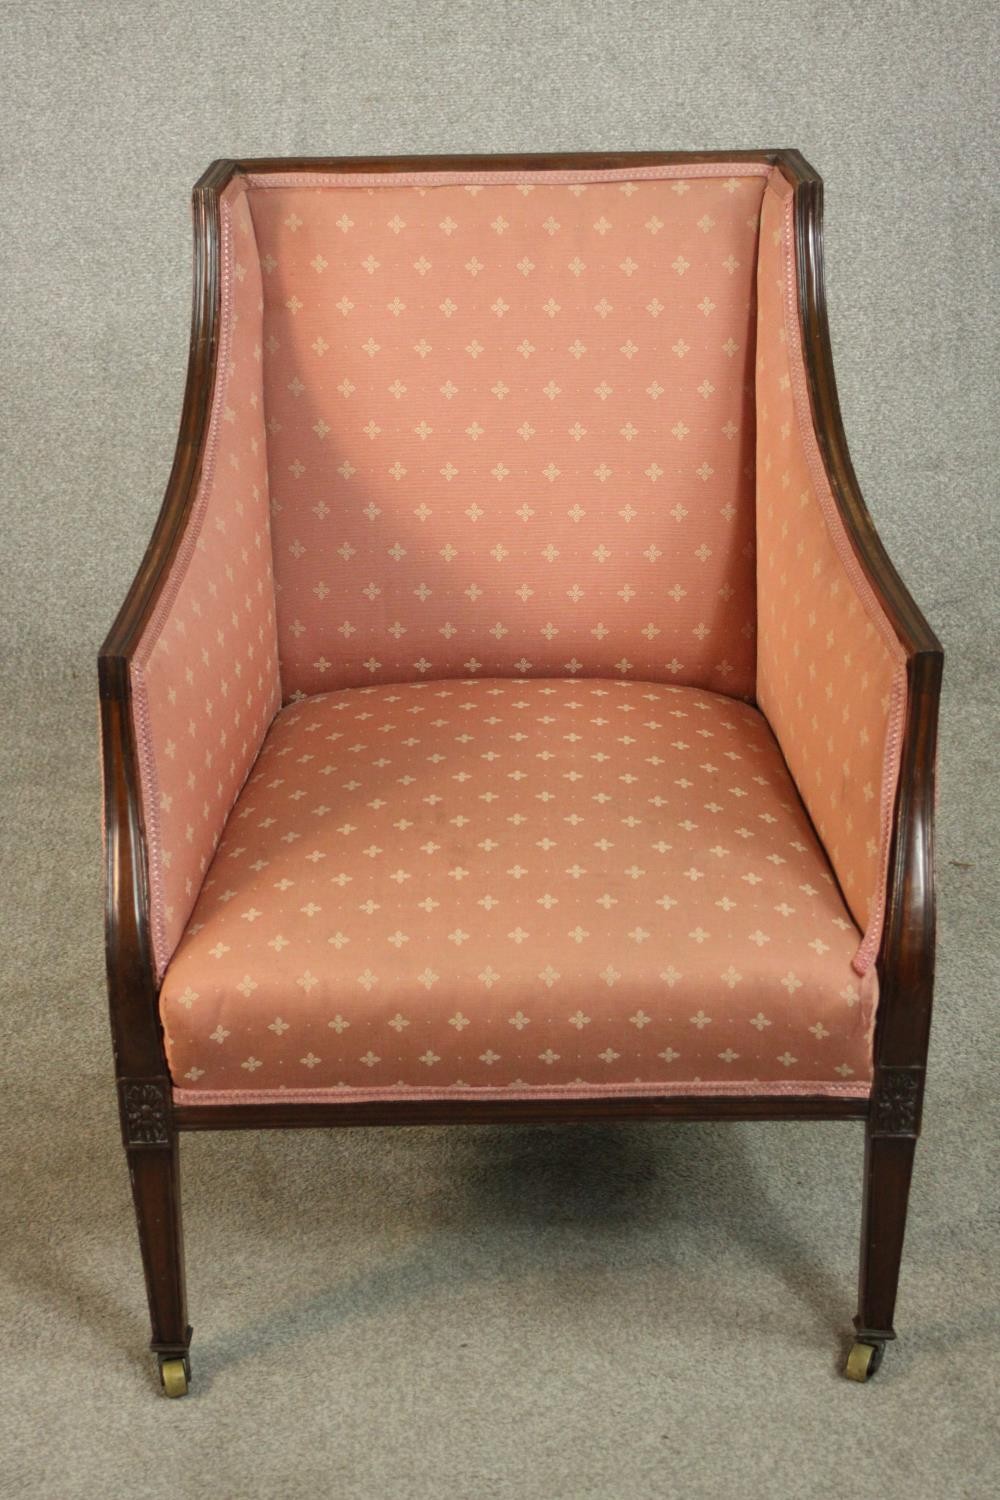 An Edwardian Adam style mahogany armchair upholstered in pink fabric, on square section tapering